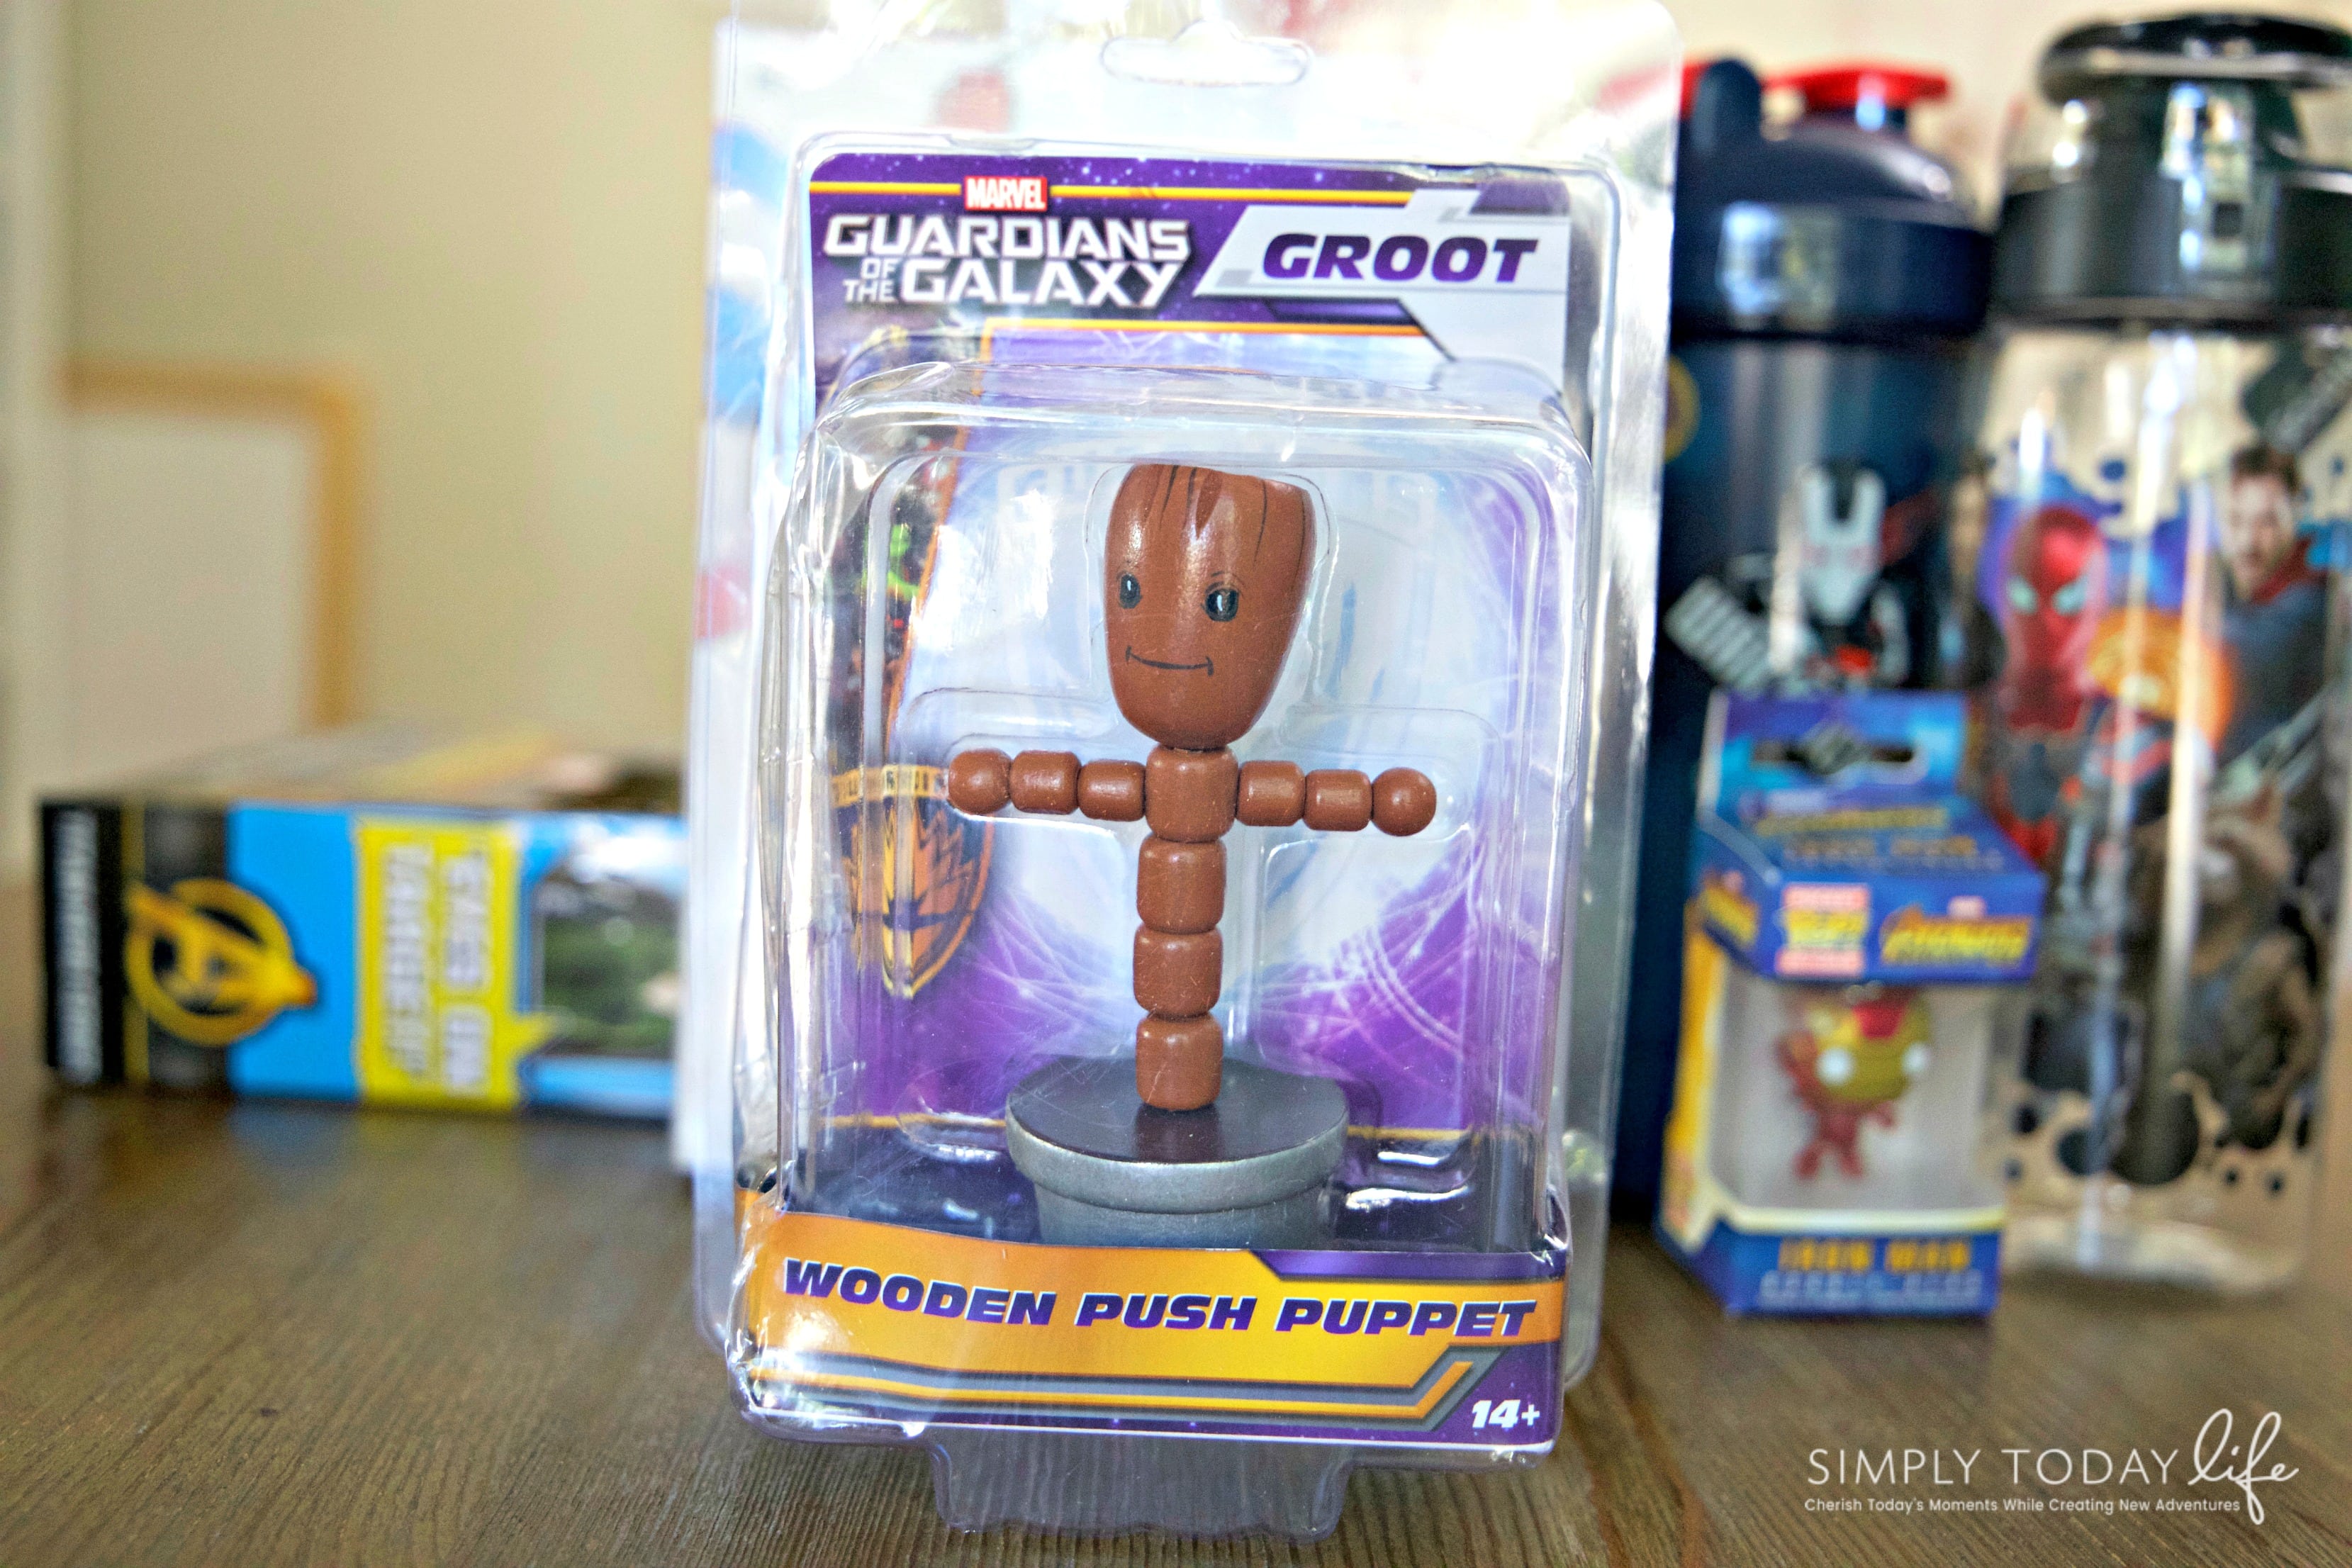 Marvel Guardians of the Galaxy Groot Wooden Push Puppet Kids Toy